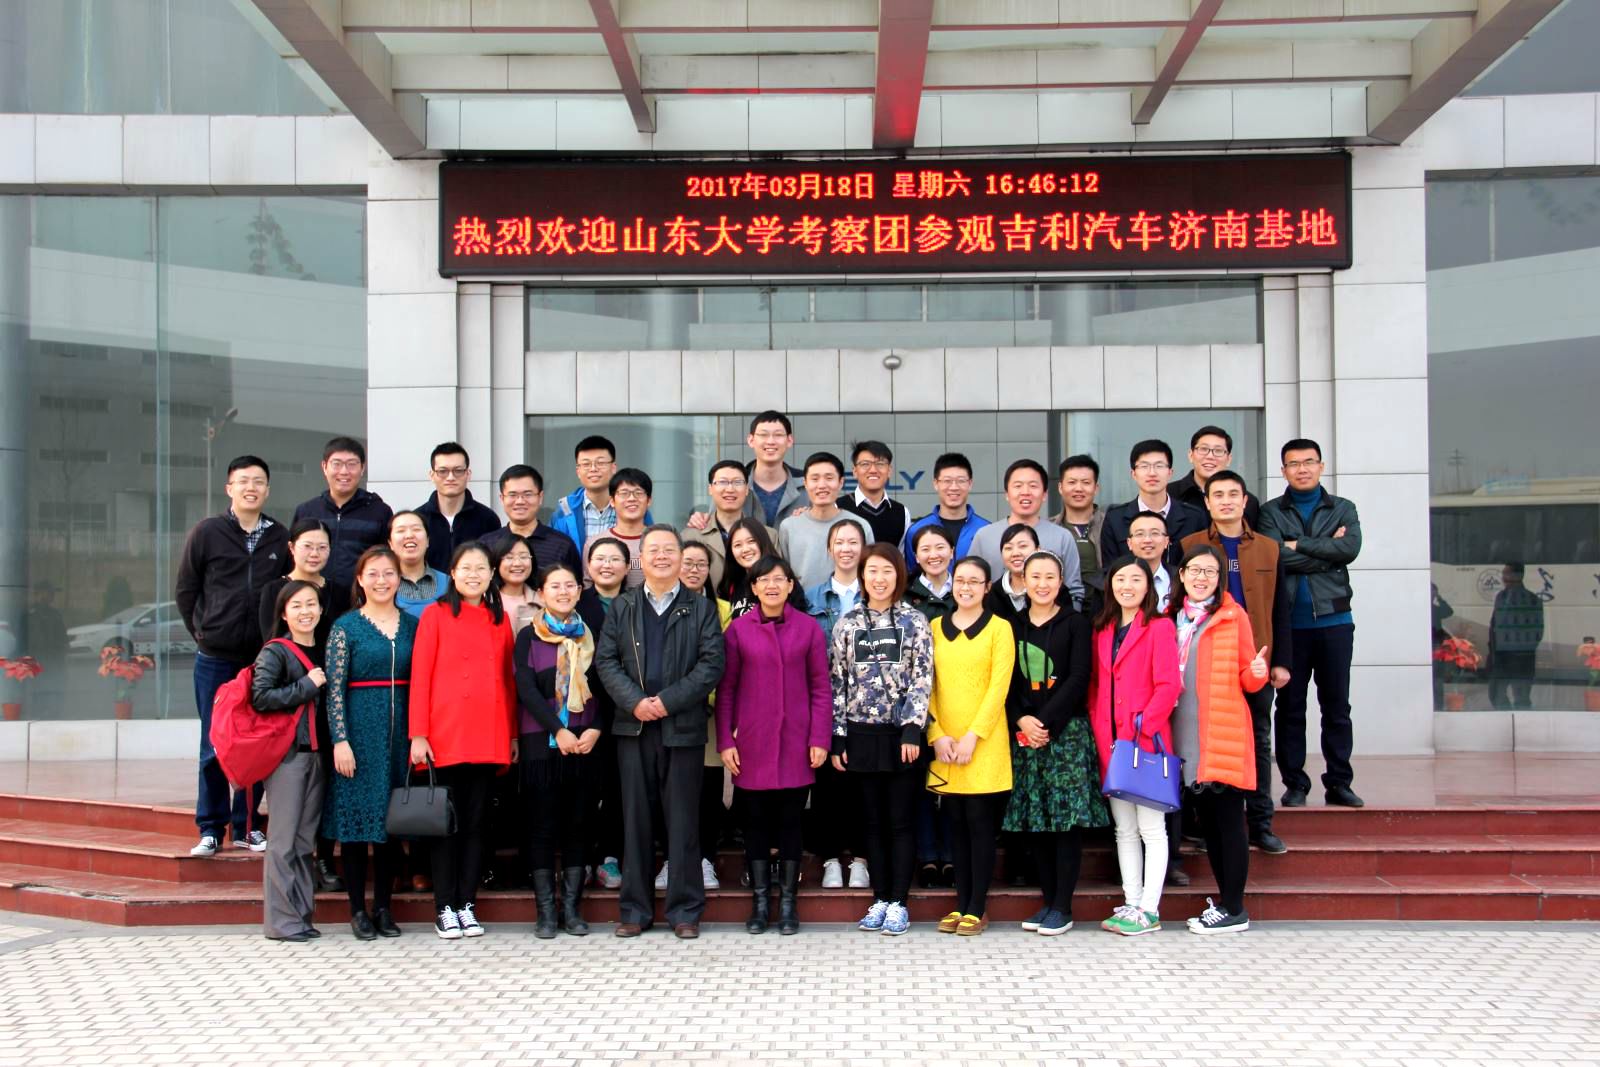 Shandong University MBA2015 students and teachers went to please, Geely Automobile Inspection exchange activities ended